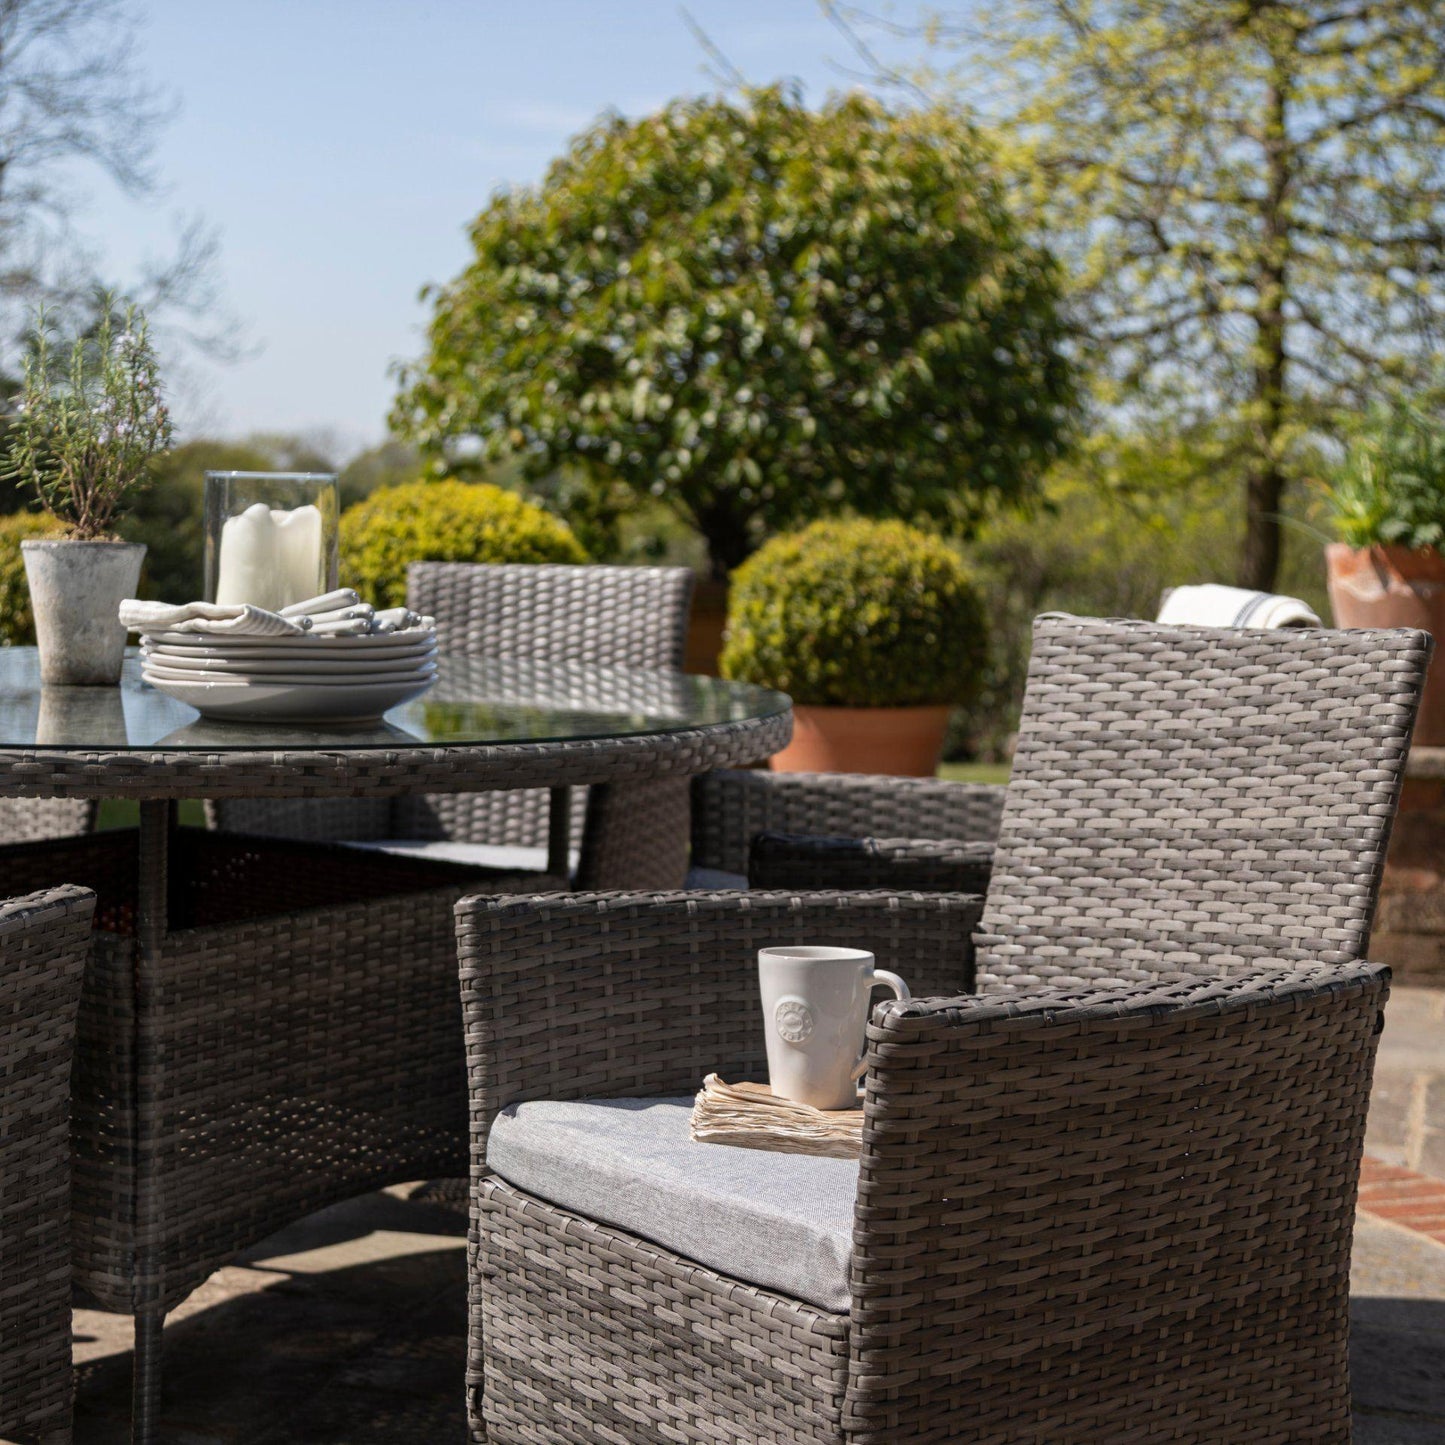 6 Seater Rattan Round Dining Set with Parasol - Rattan Garden Furniture - Grey - In Stock Date - 30th June 2020 - Laura James